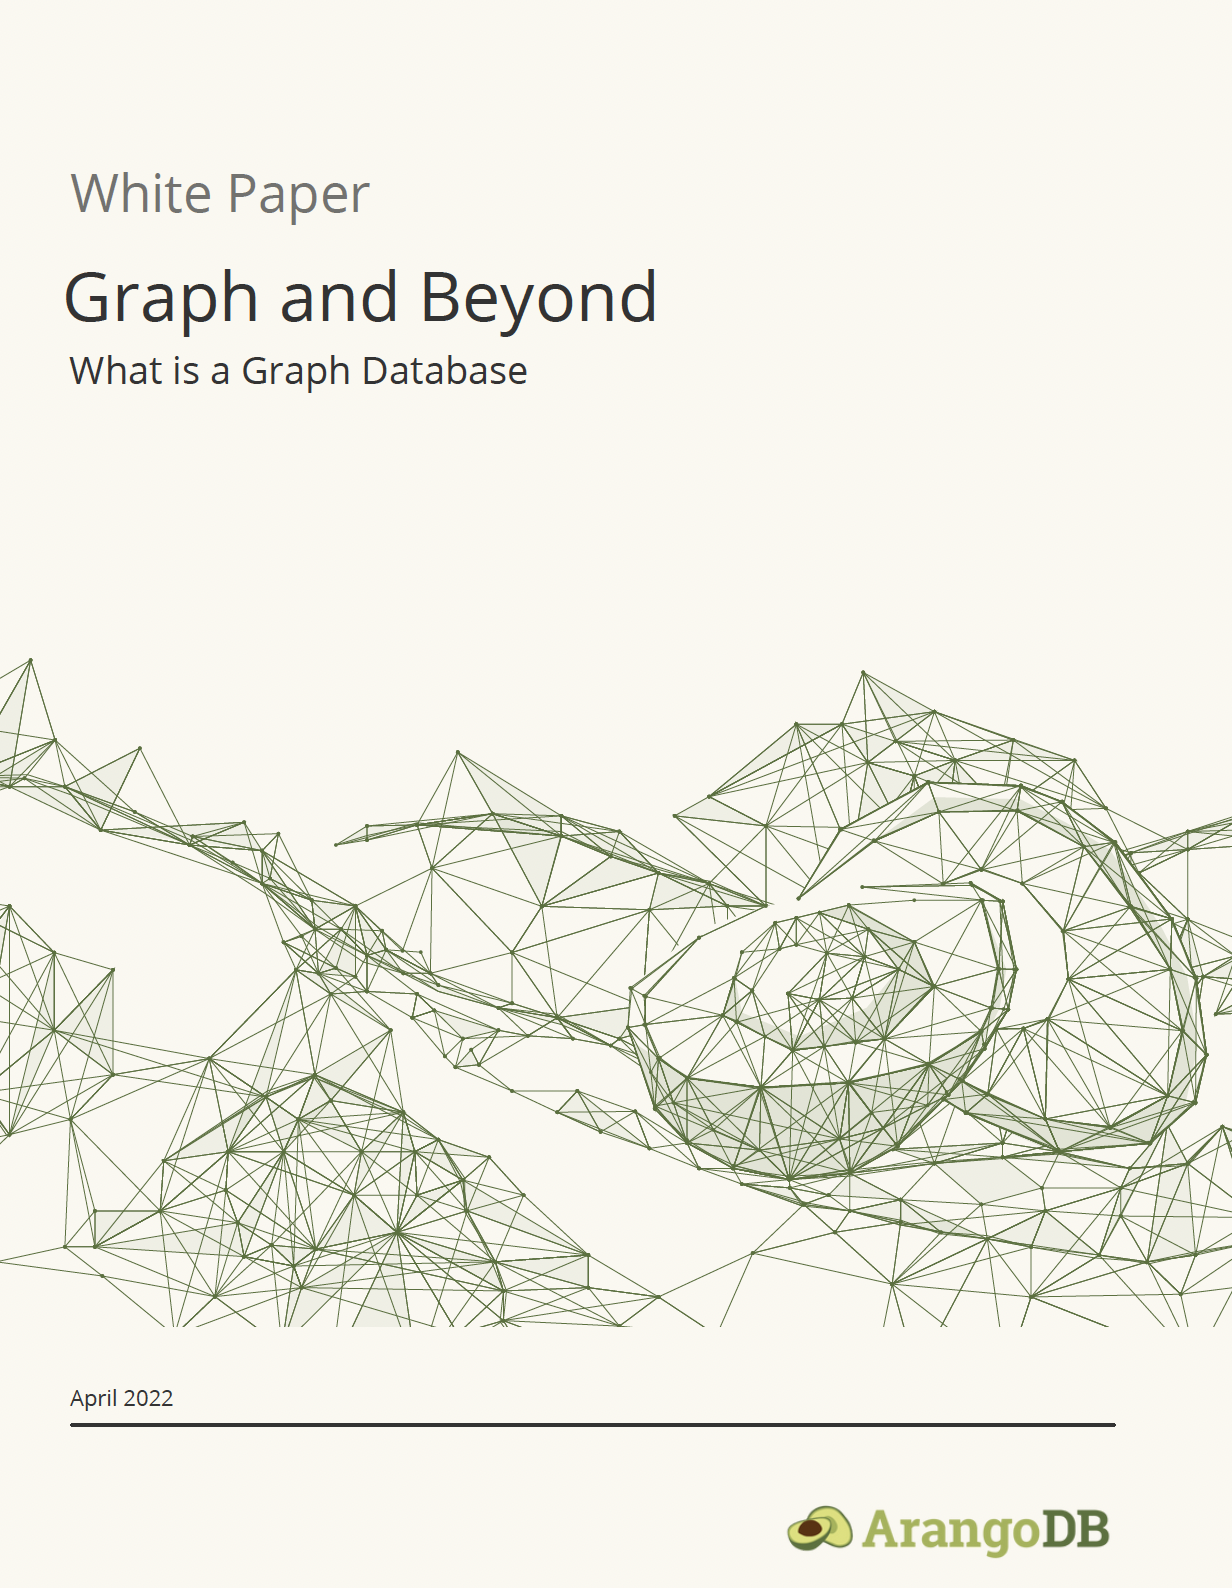 What is Graph Database